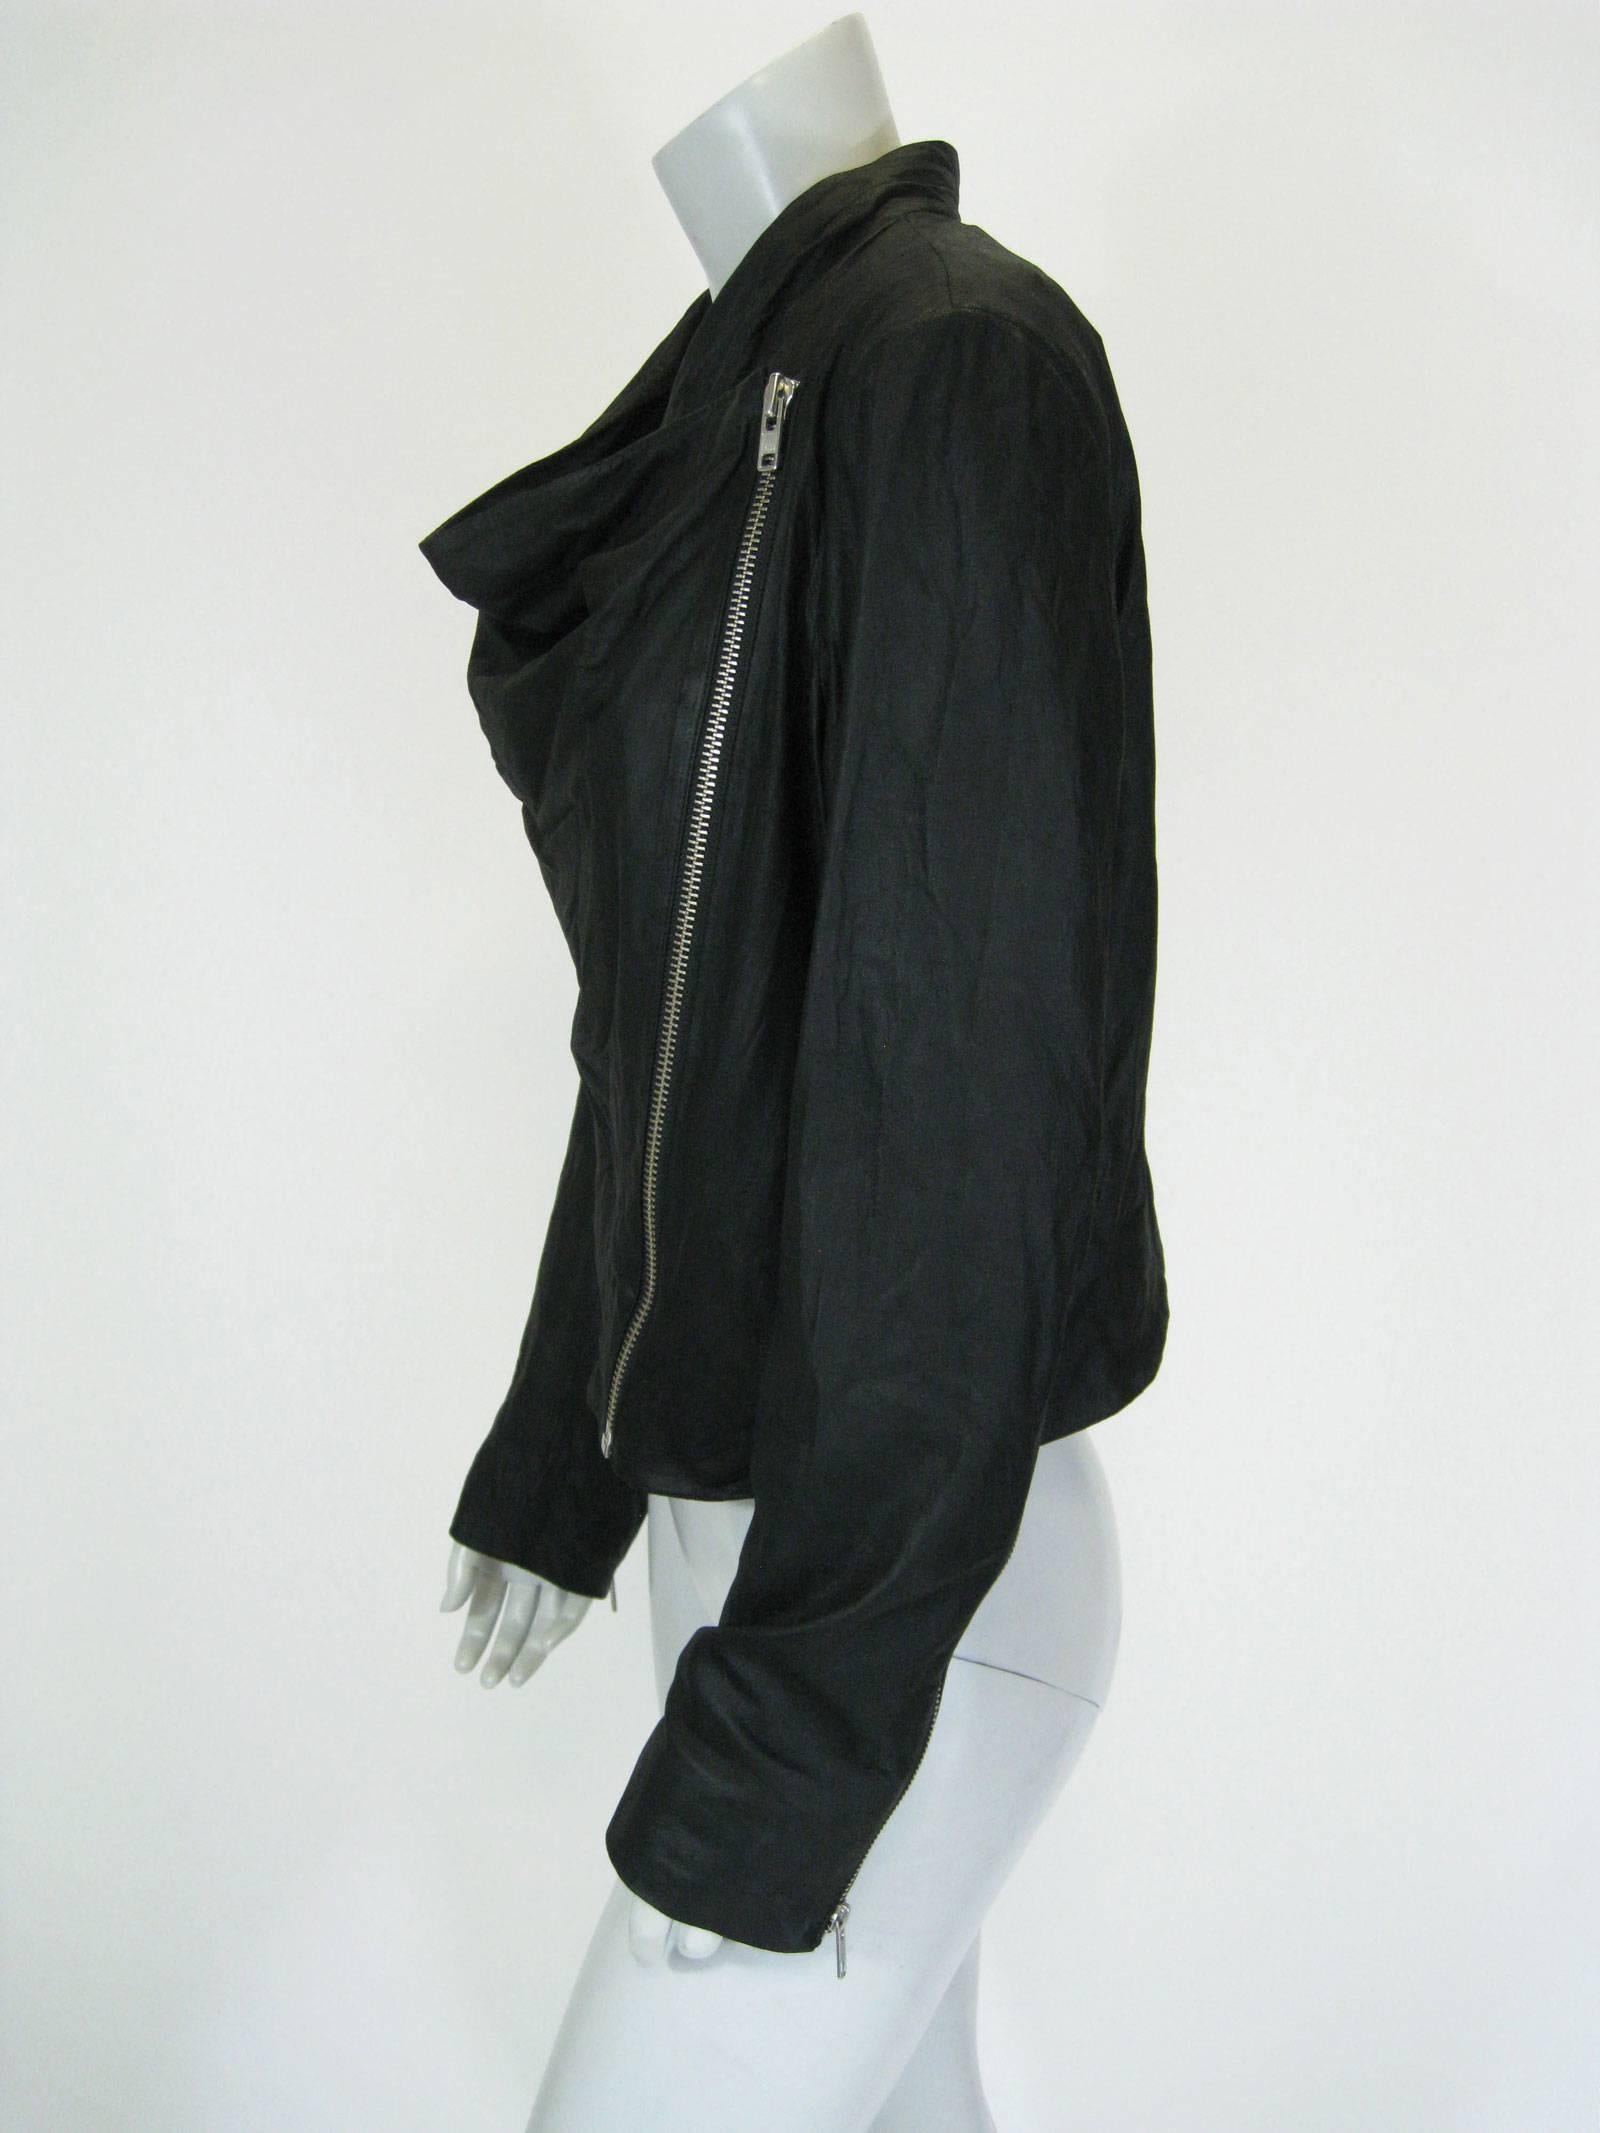 The modern biker jacket by Helmut Lang.
Soft supple black lambskin.
New with tags.
Loose, cowl neck.
Asymmetrical side zipper with snap closure.
Side pockets.
Long sleeve with zippers on wrists.
Lined in cotton.
Tagged a size large.